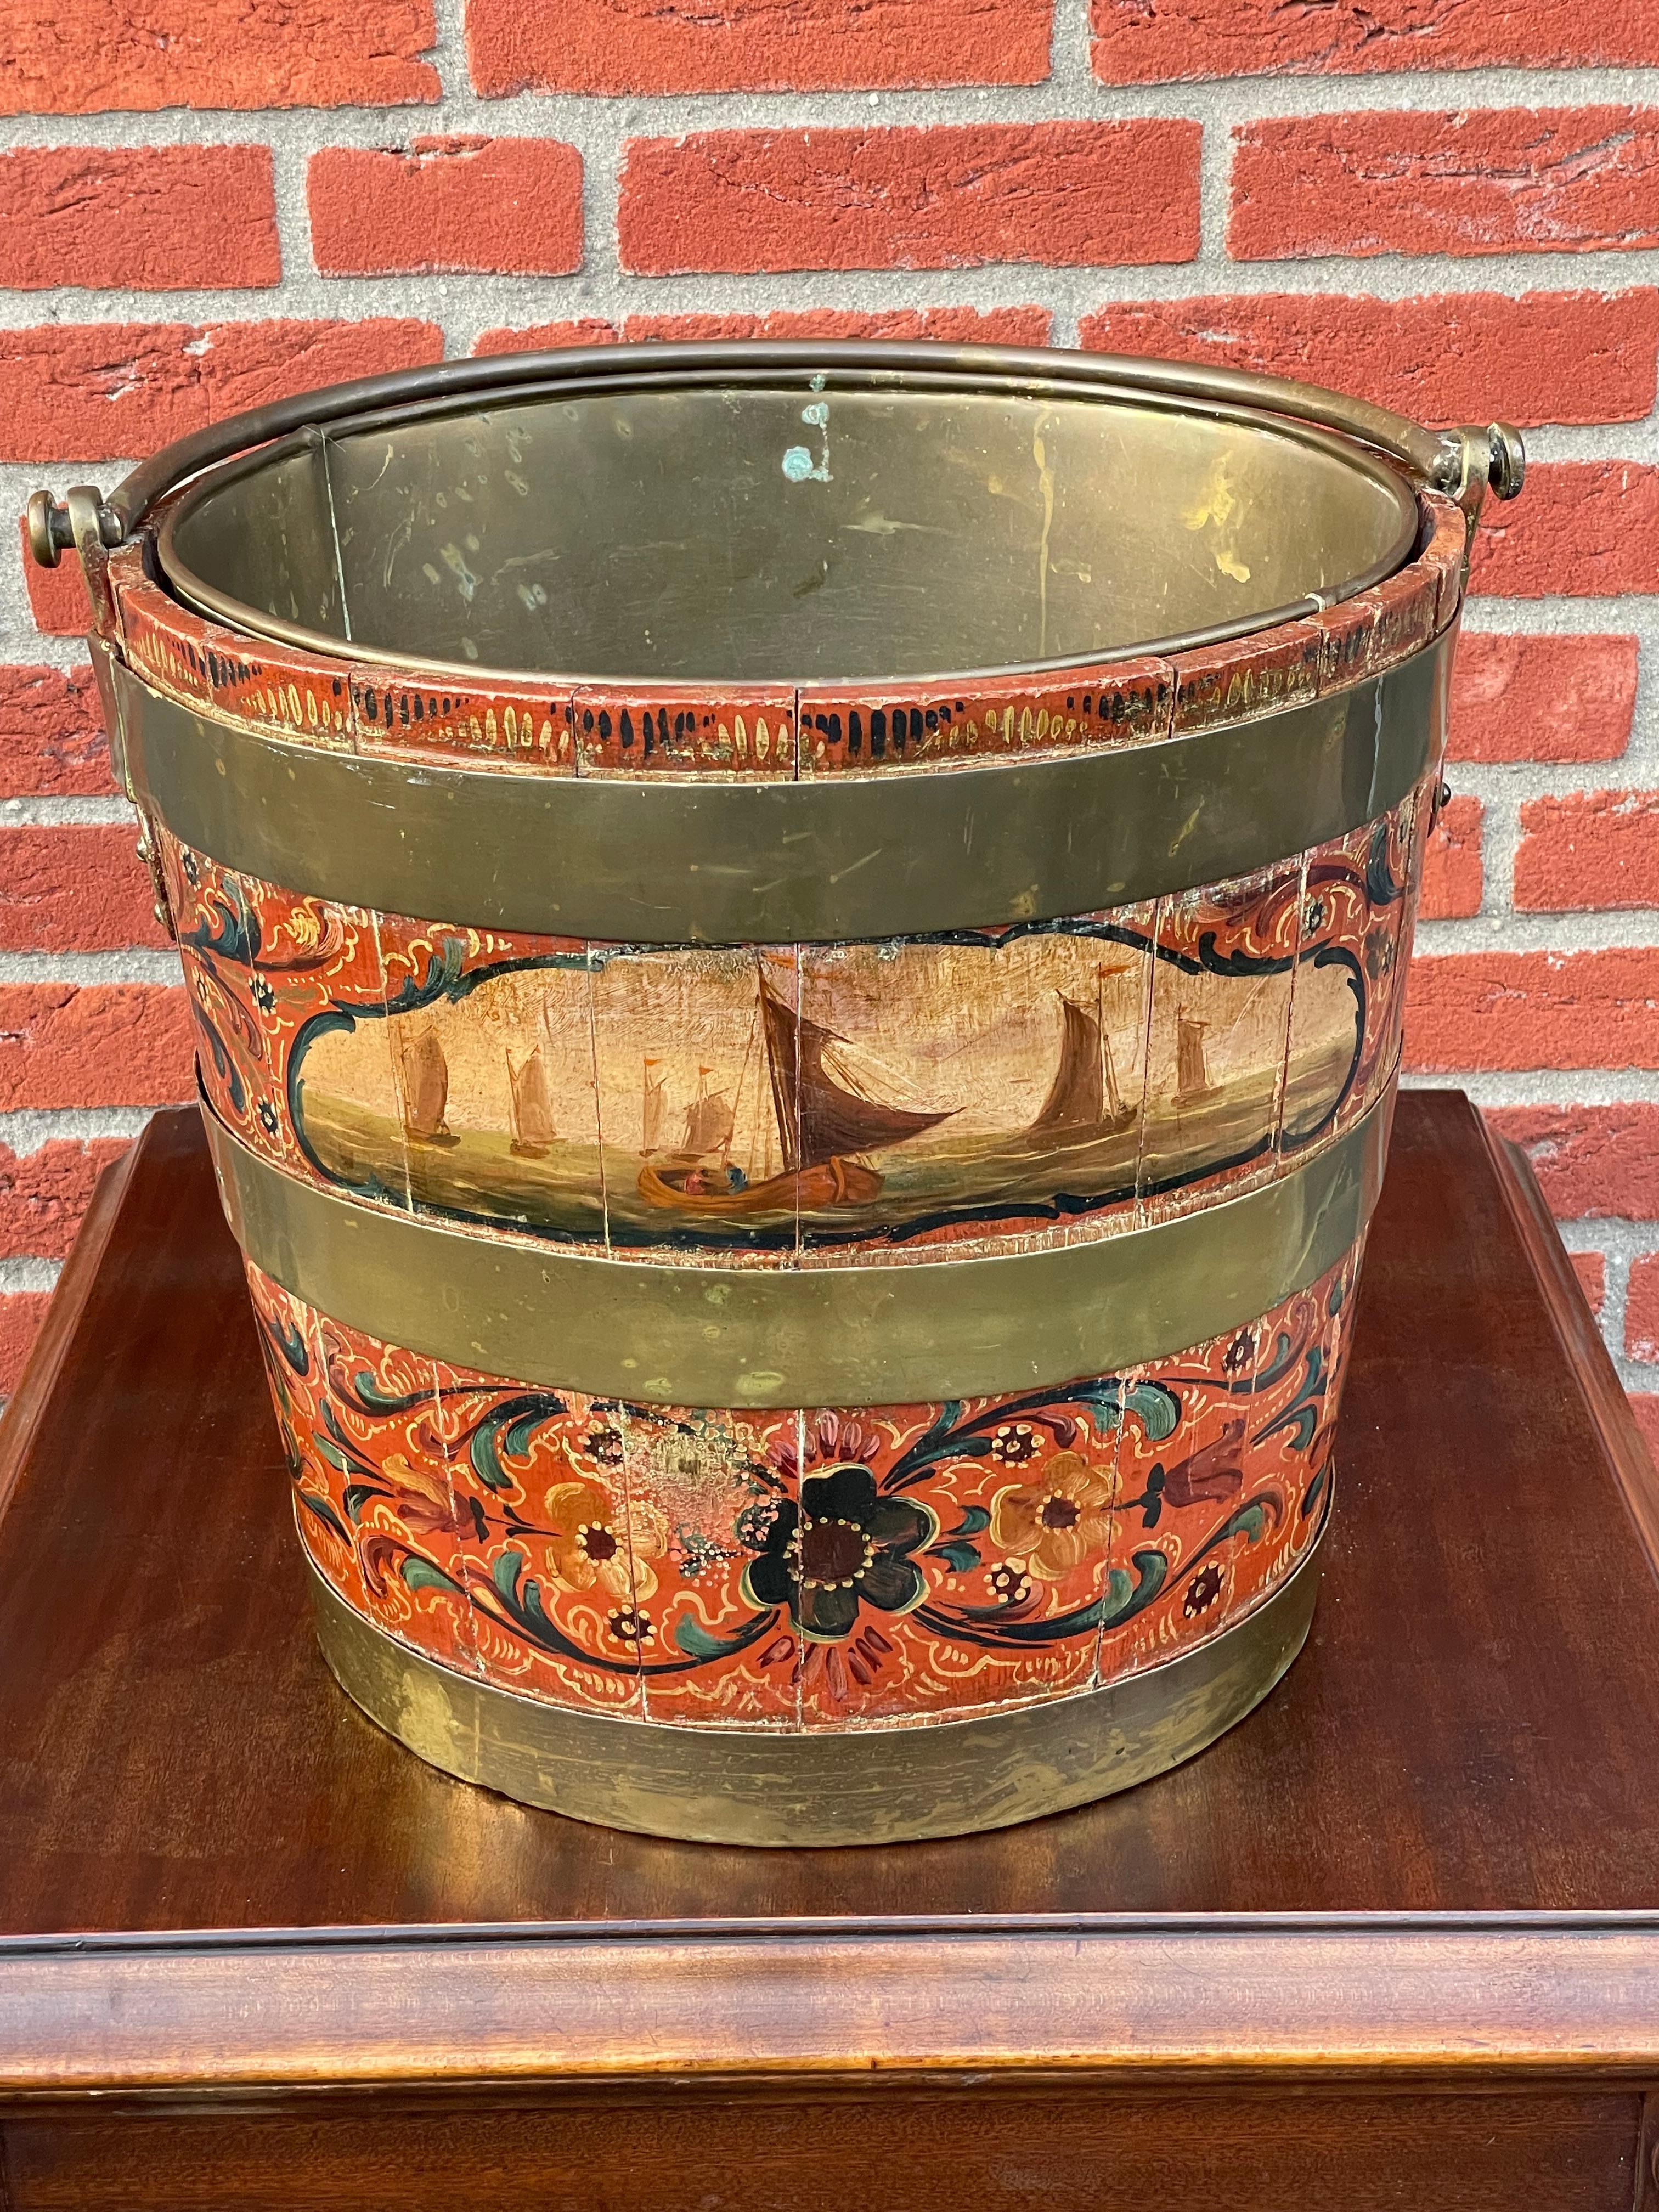 Handcrafted, rare and important 'tea bucket', early 1800s.

For a museum quality, ultra rare and pure Dutch Folk Art antique from the early to mid 1800s there is always room in your home or collection. This marvelous and all handcrafted tea-bucket